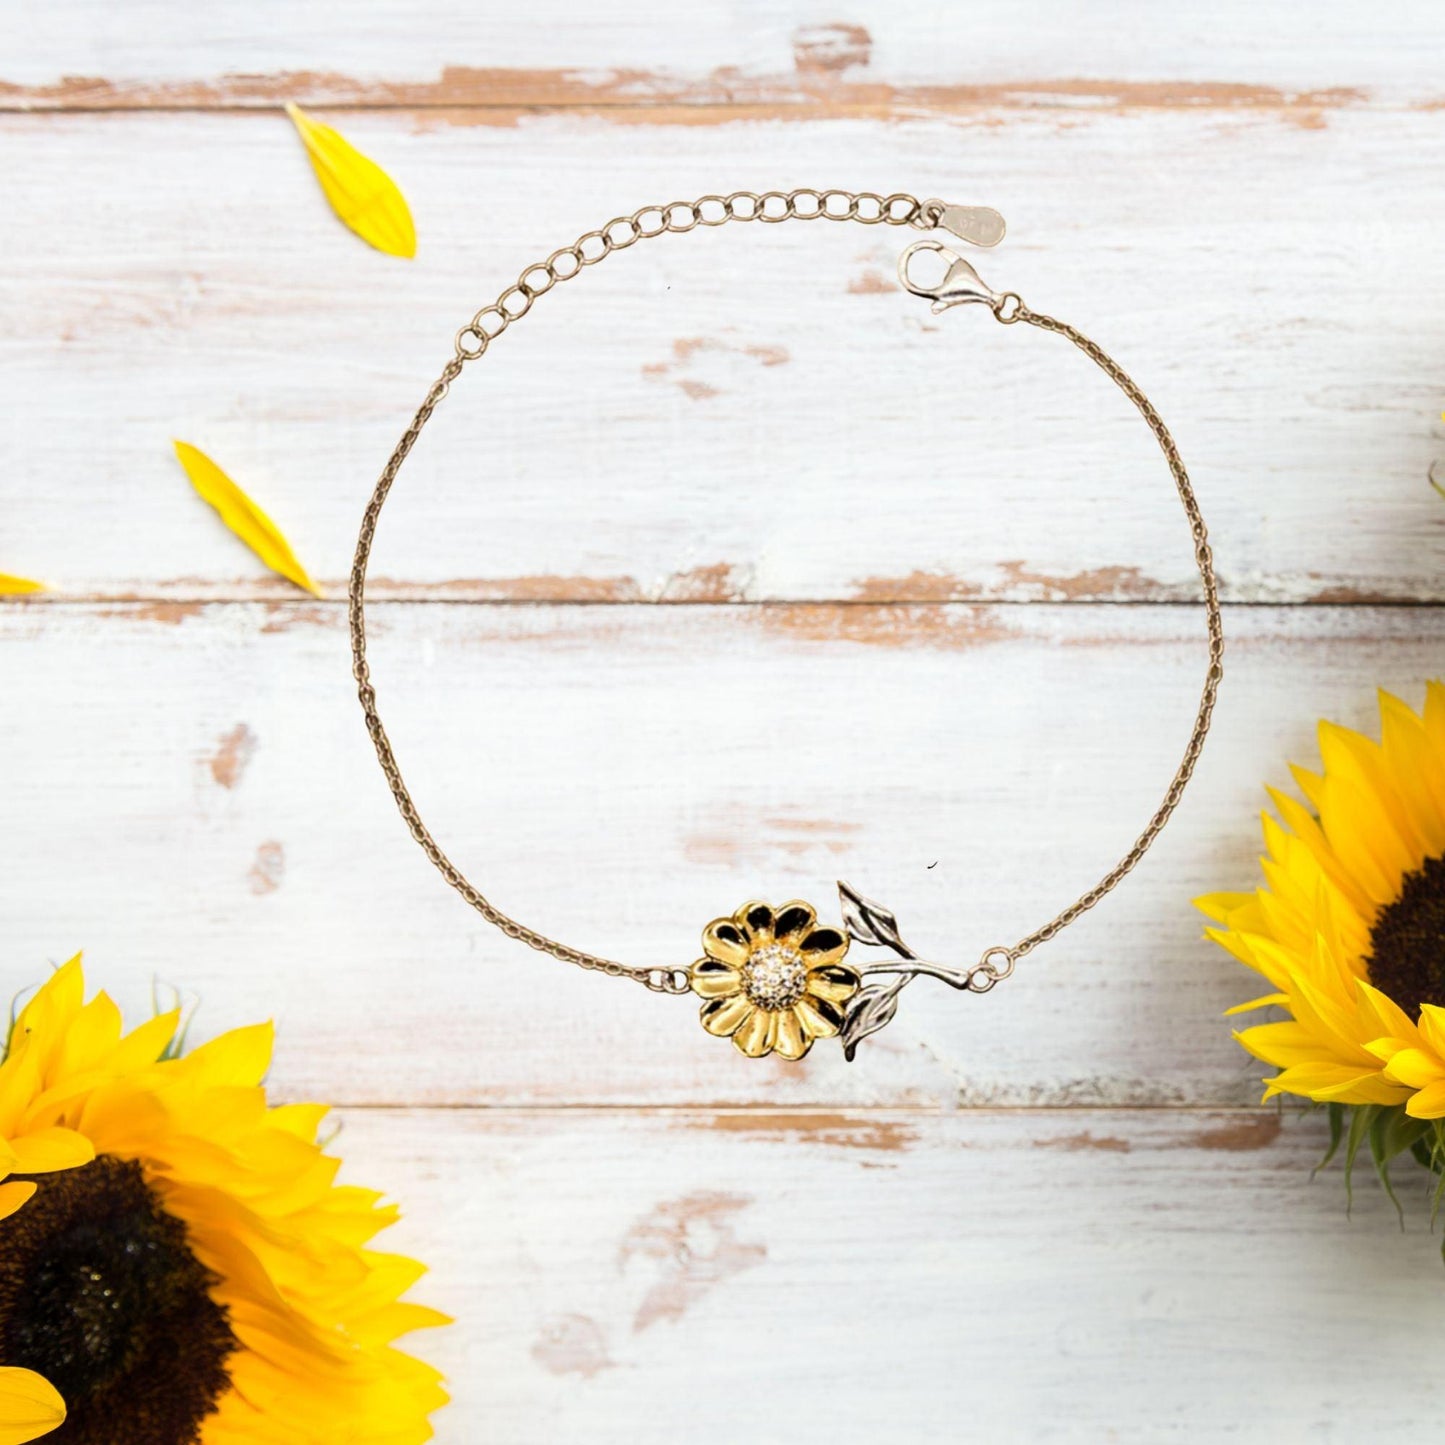 Mixologist Sunflower Bracelet - Thanks for being who you are - Birthday Christmas Jewelry Gifts Coworkers Colleague Boss - Mallard Moon Gift Shop